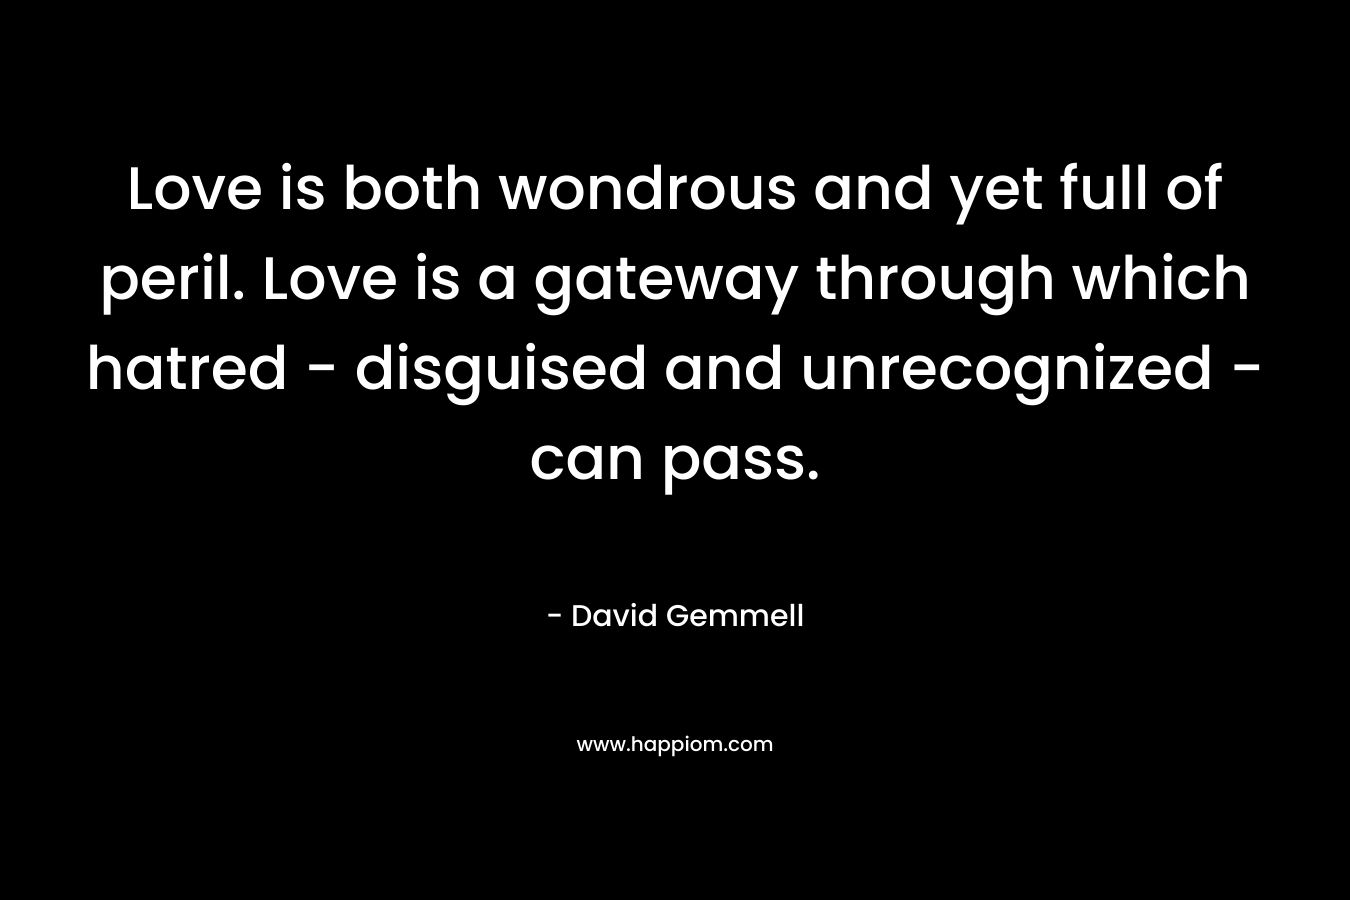 Love is both wondrous and yet full of peril. Love is a gateway through which hatred – disguised and unrecognized – can pass. – David Gemmell